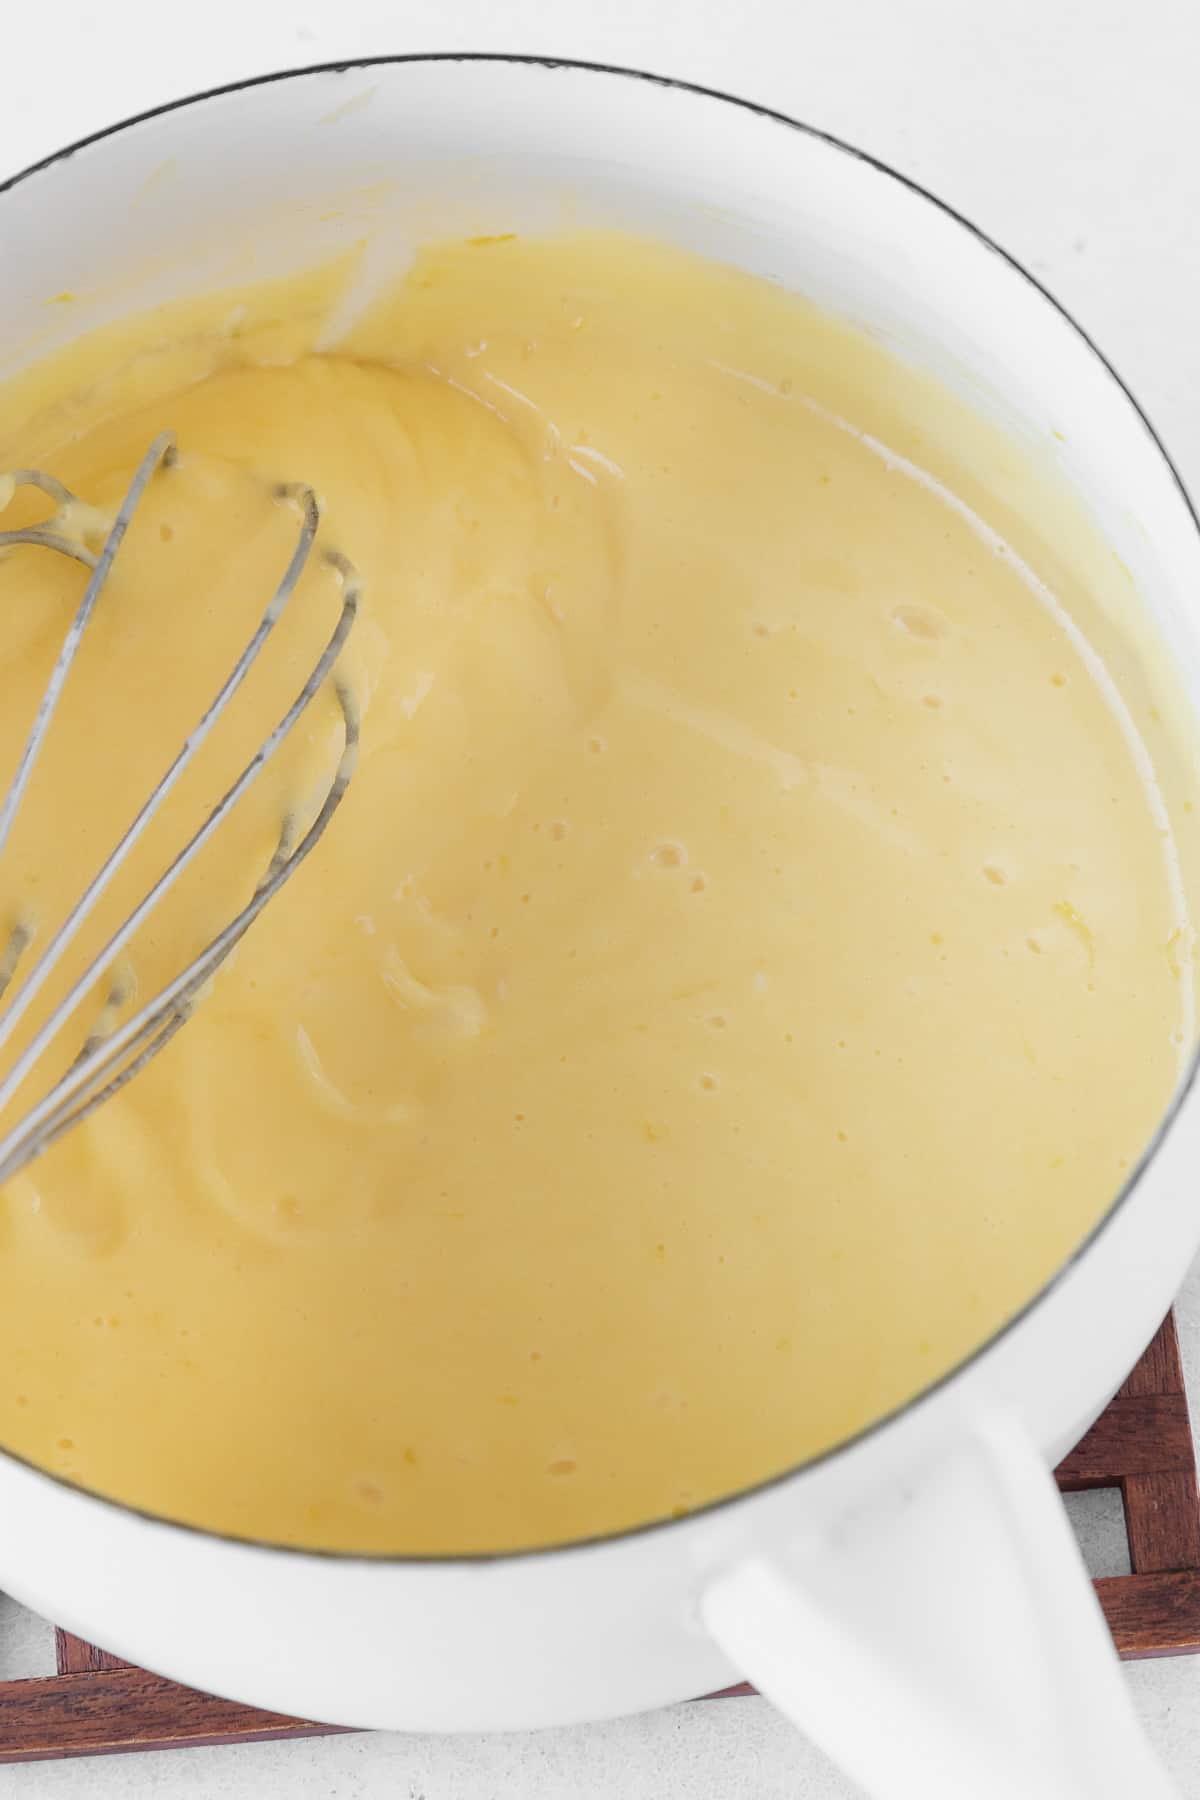 Cooking the dairy-free lemon curd in a white saucepan.